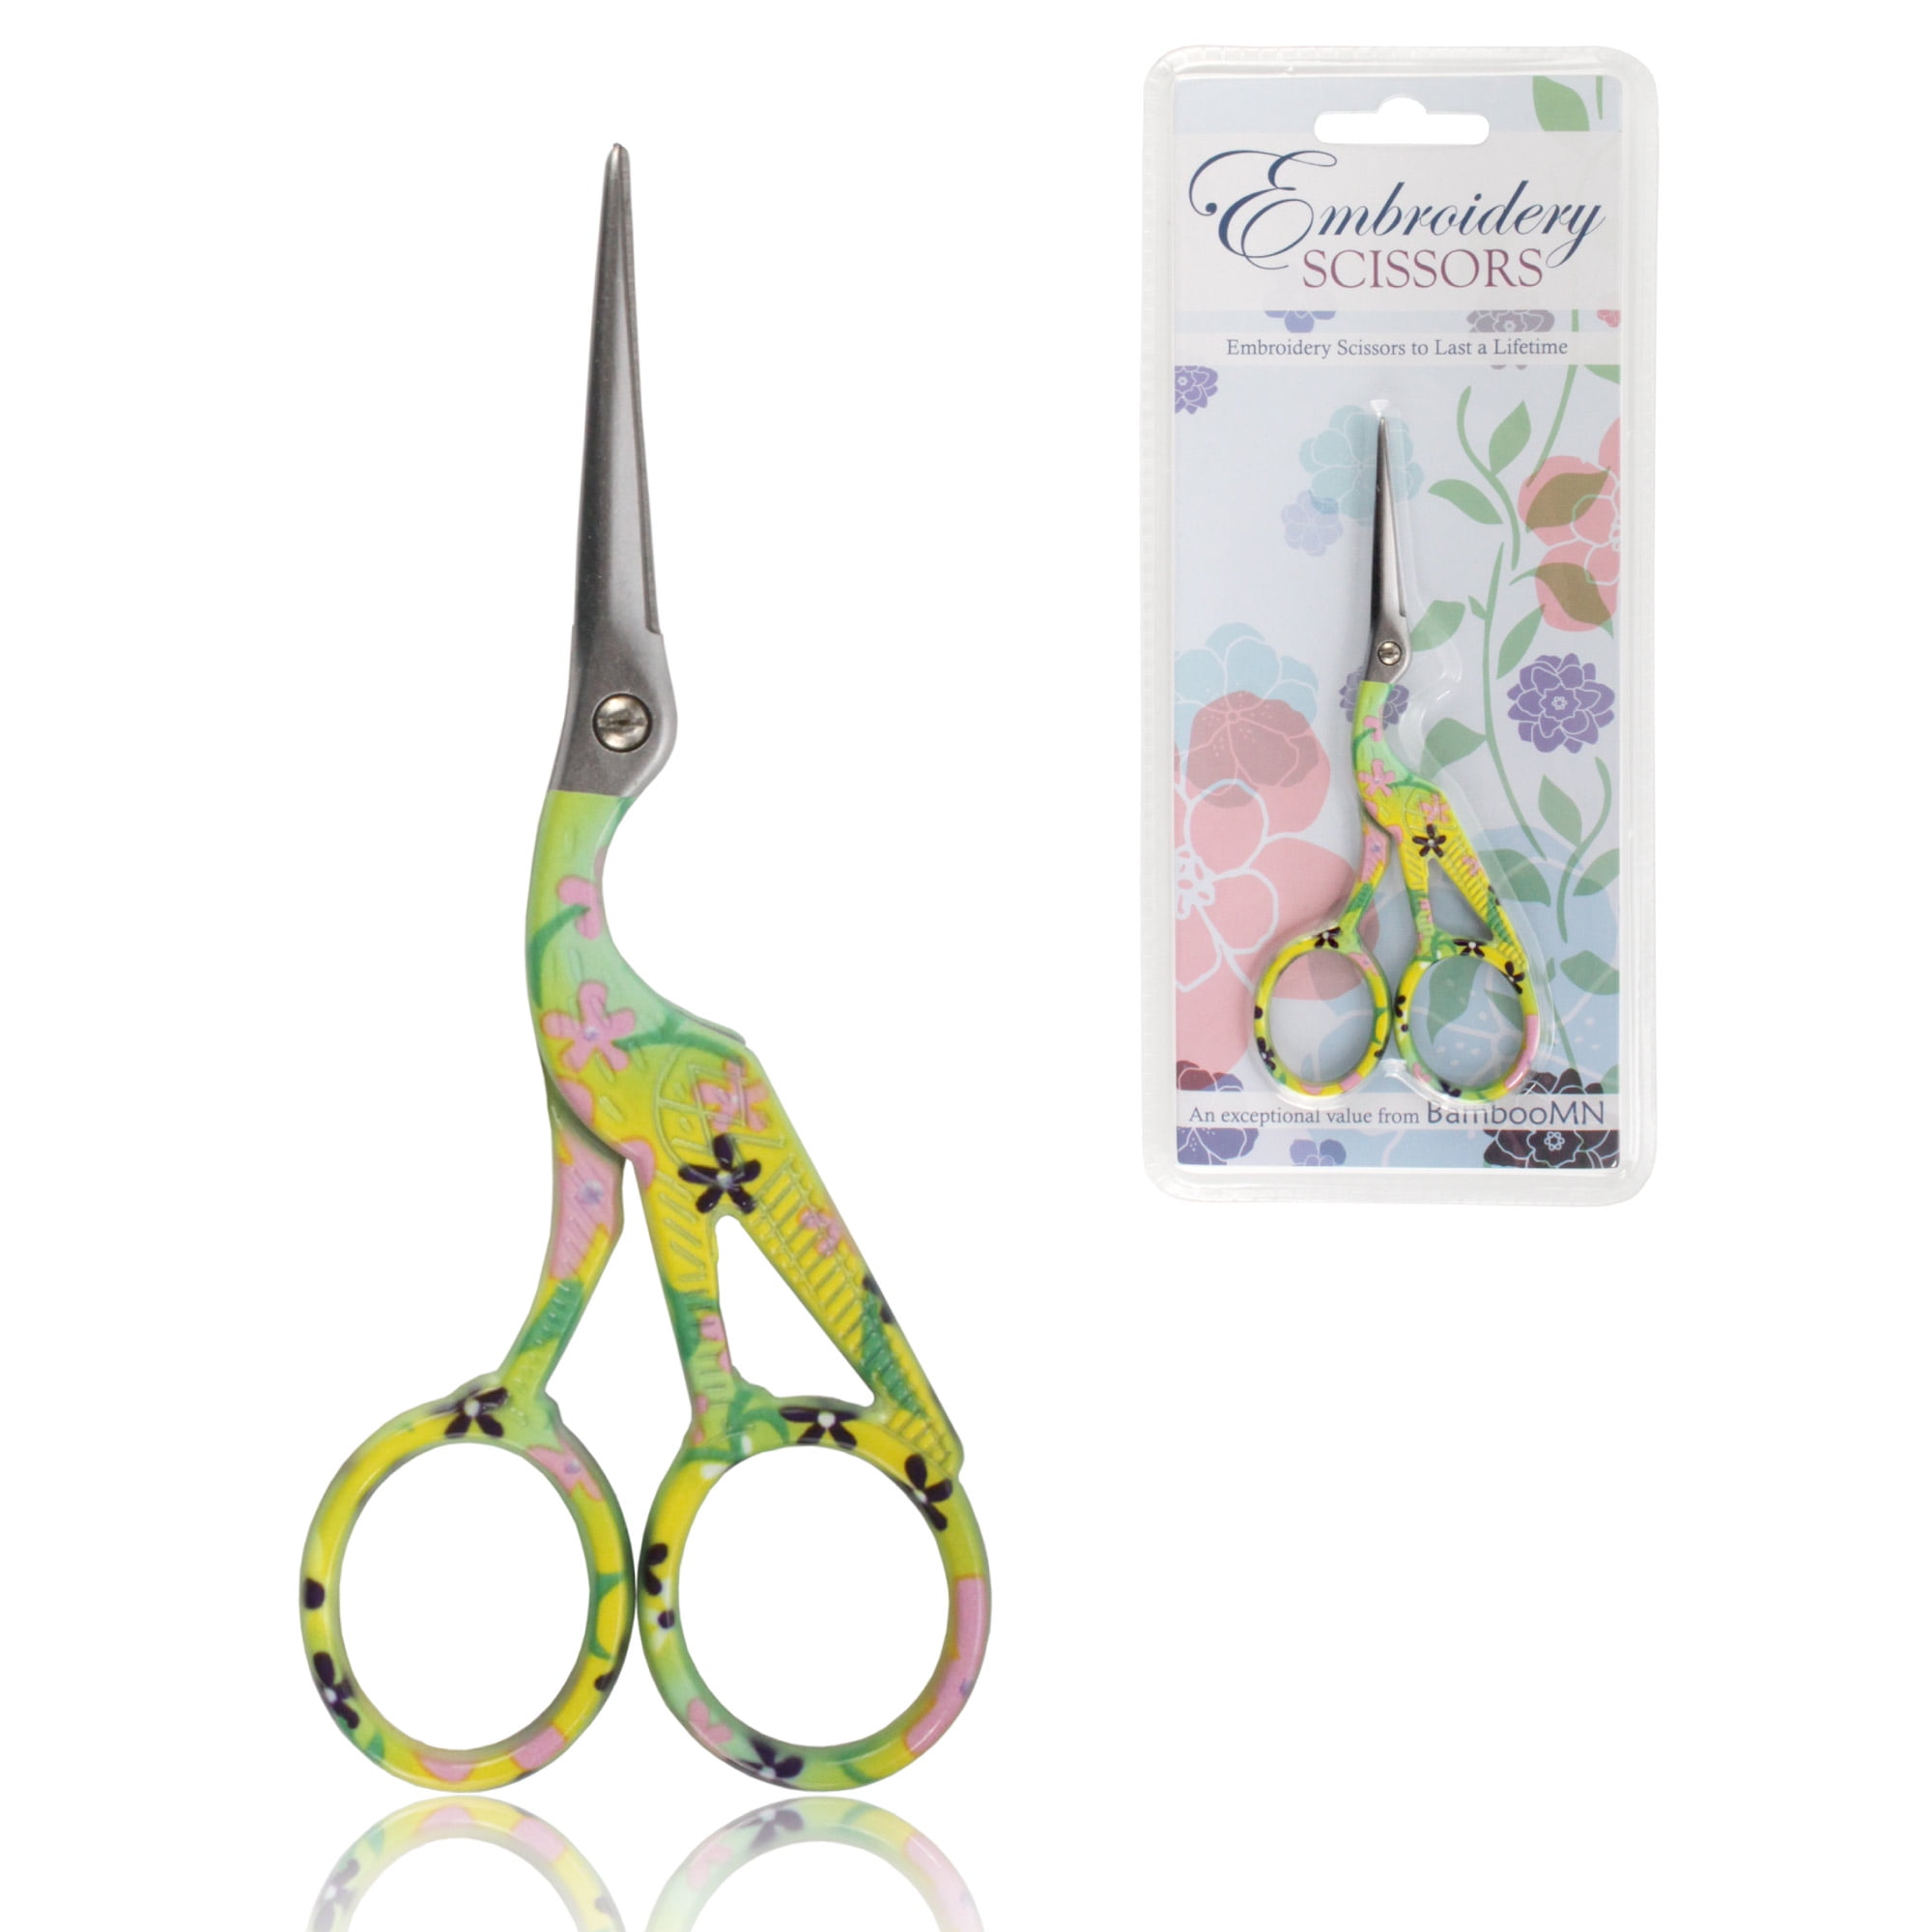 Leather Scissors, Stainless Steel Fabric Scissors Safe Use DIY Tool for  Adults, Students, Teachers, Embroidery, Paper Cutting, and Fabric